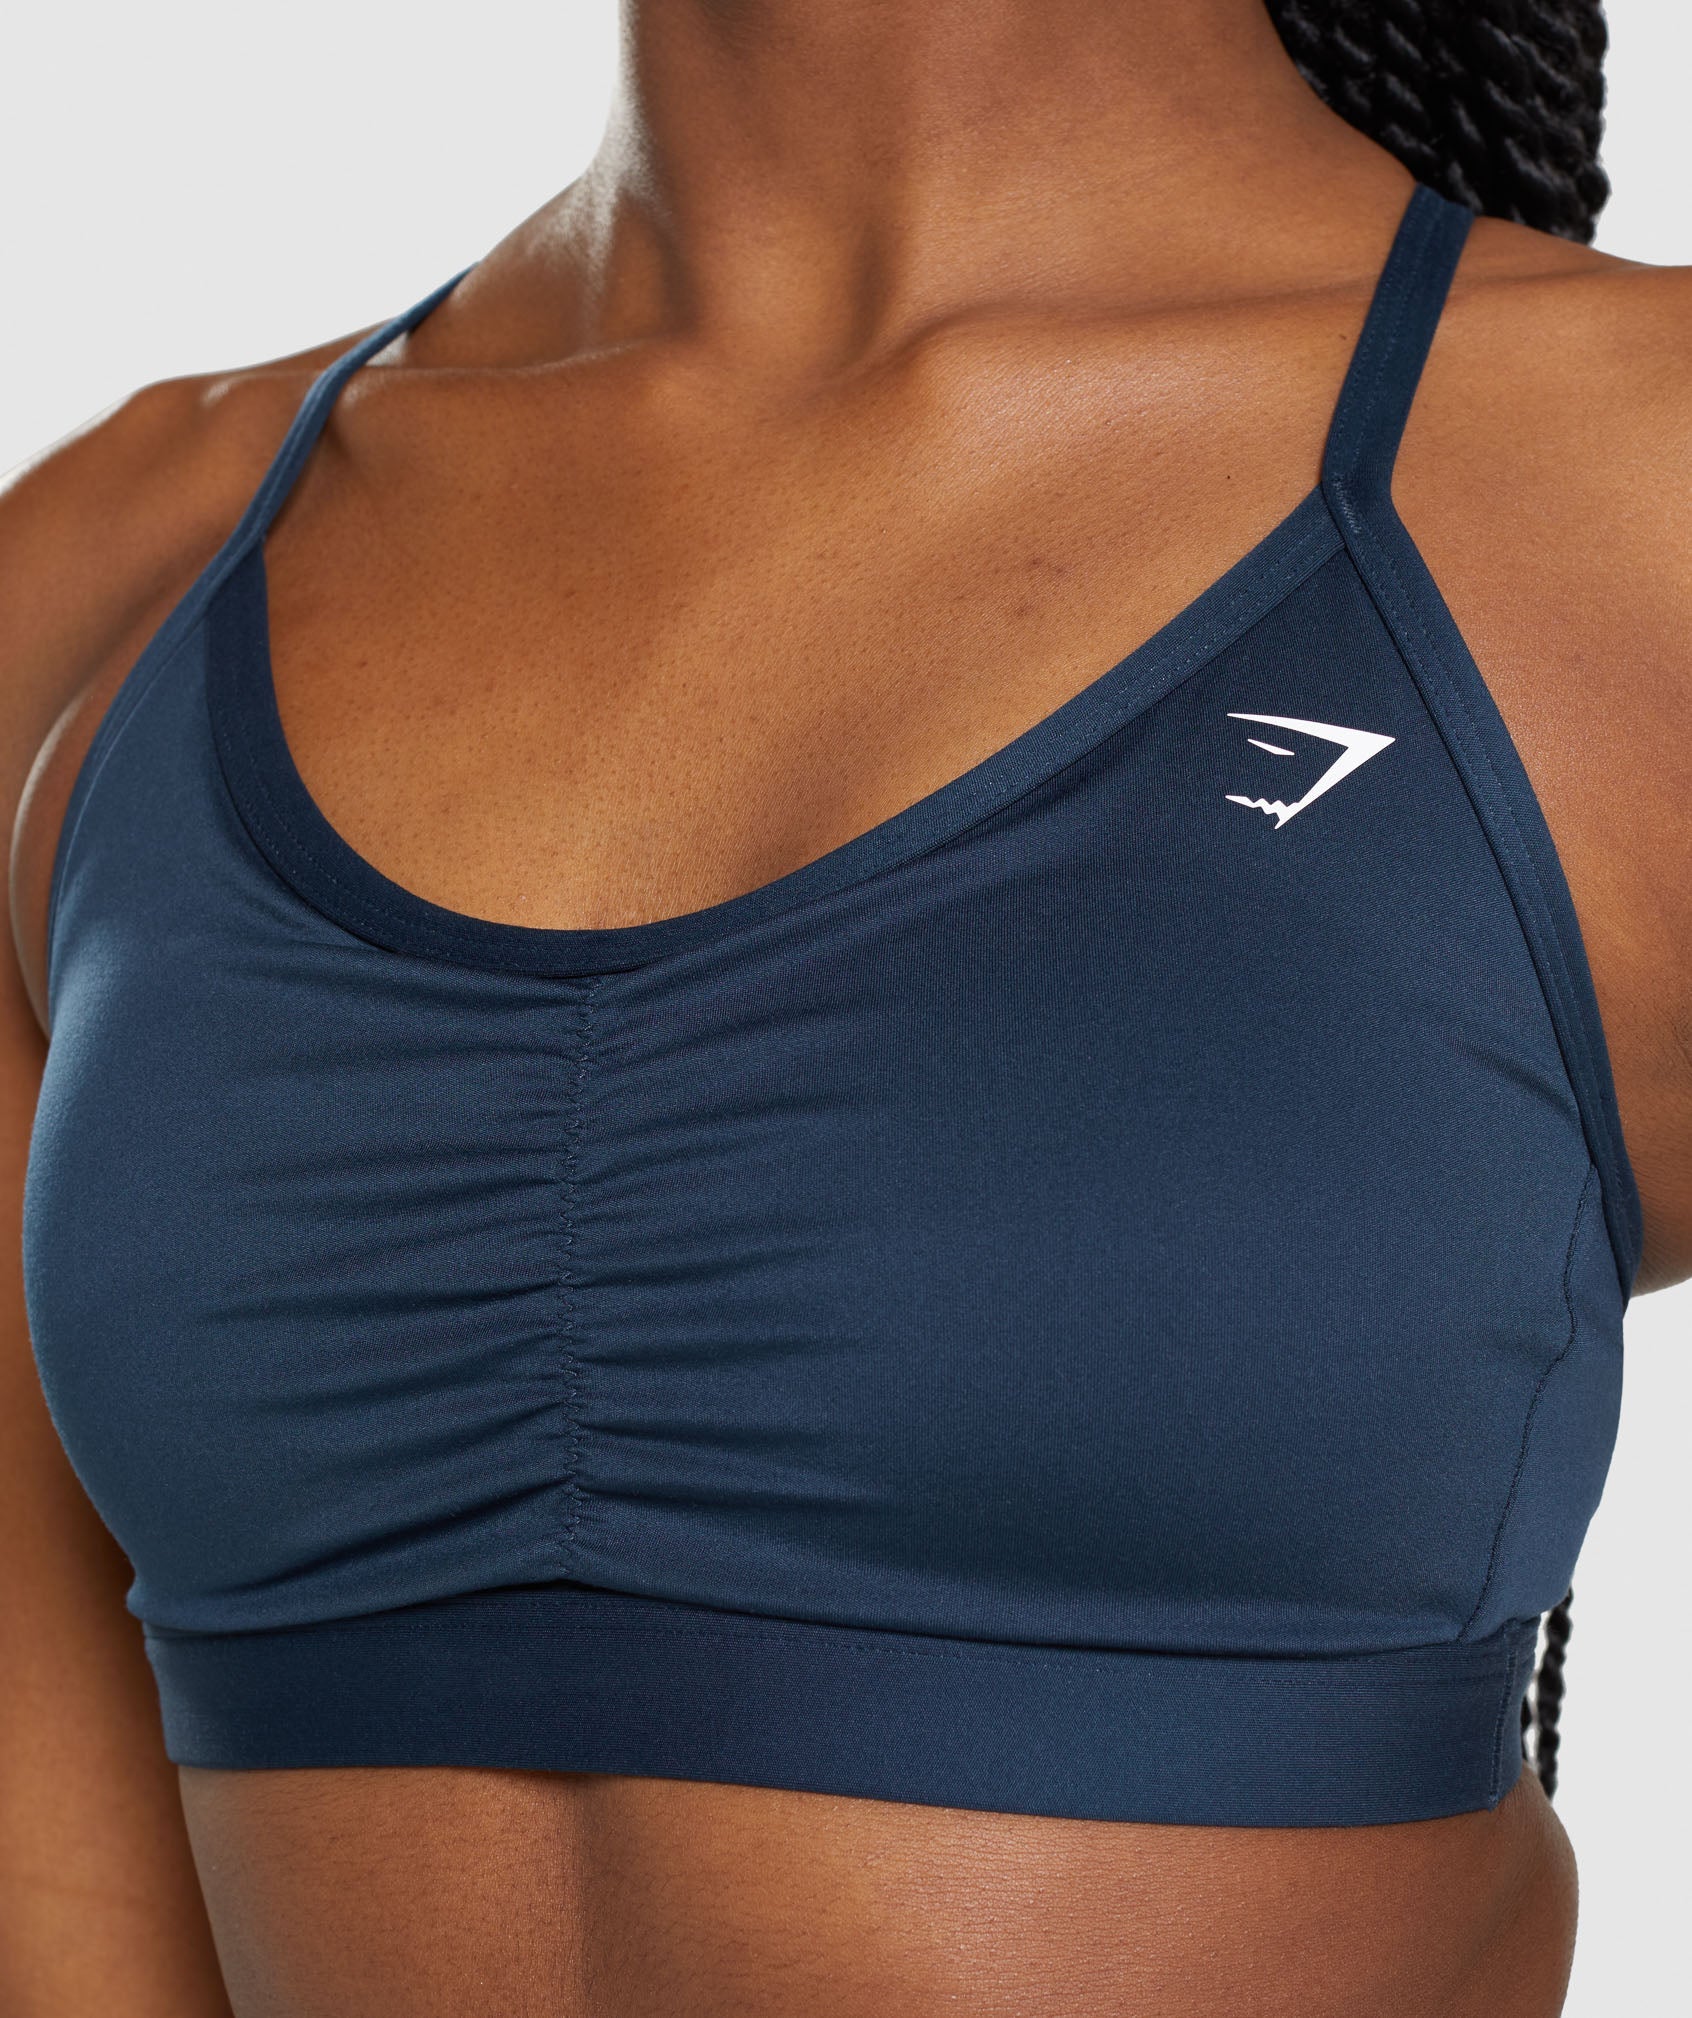 Ruched Sports Bra in Navy - view 6